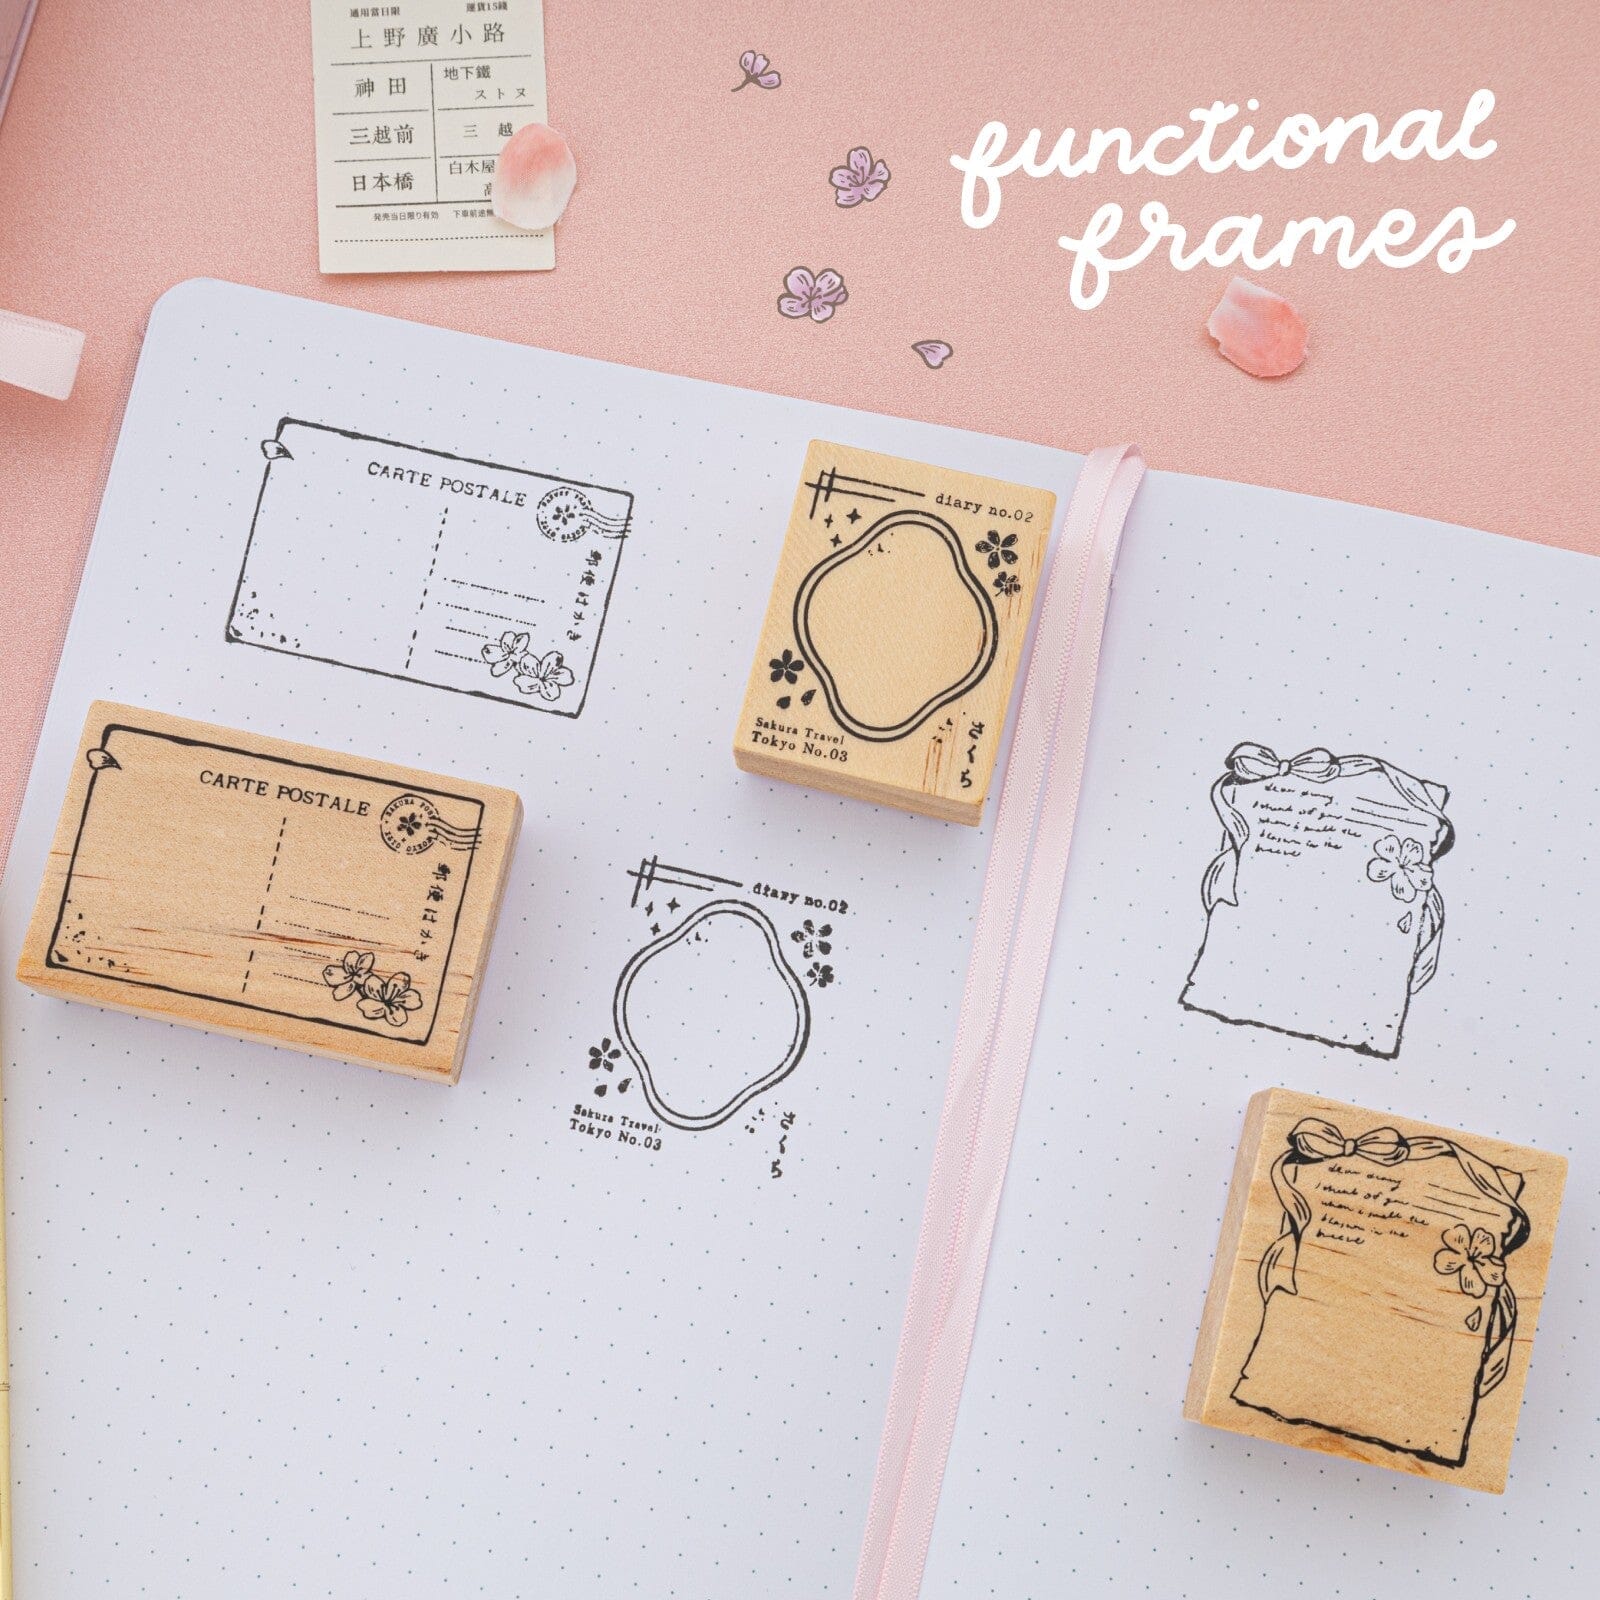 Tsuki 'Happy Day' Bullet Journal Stamp Set – NotebookTherapy